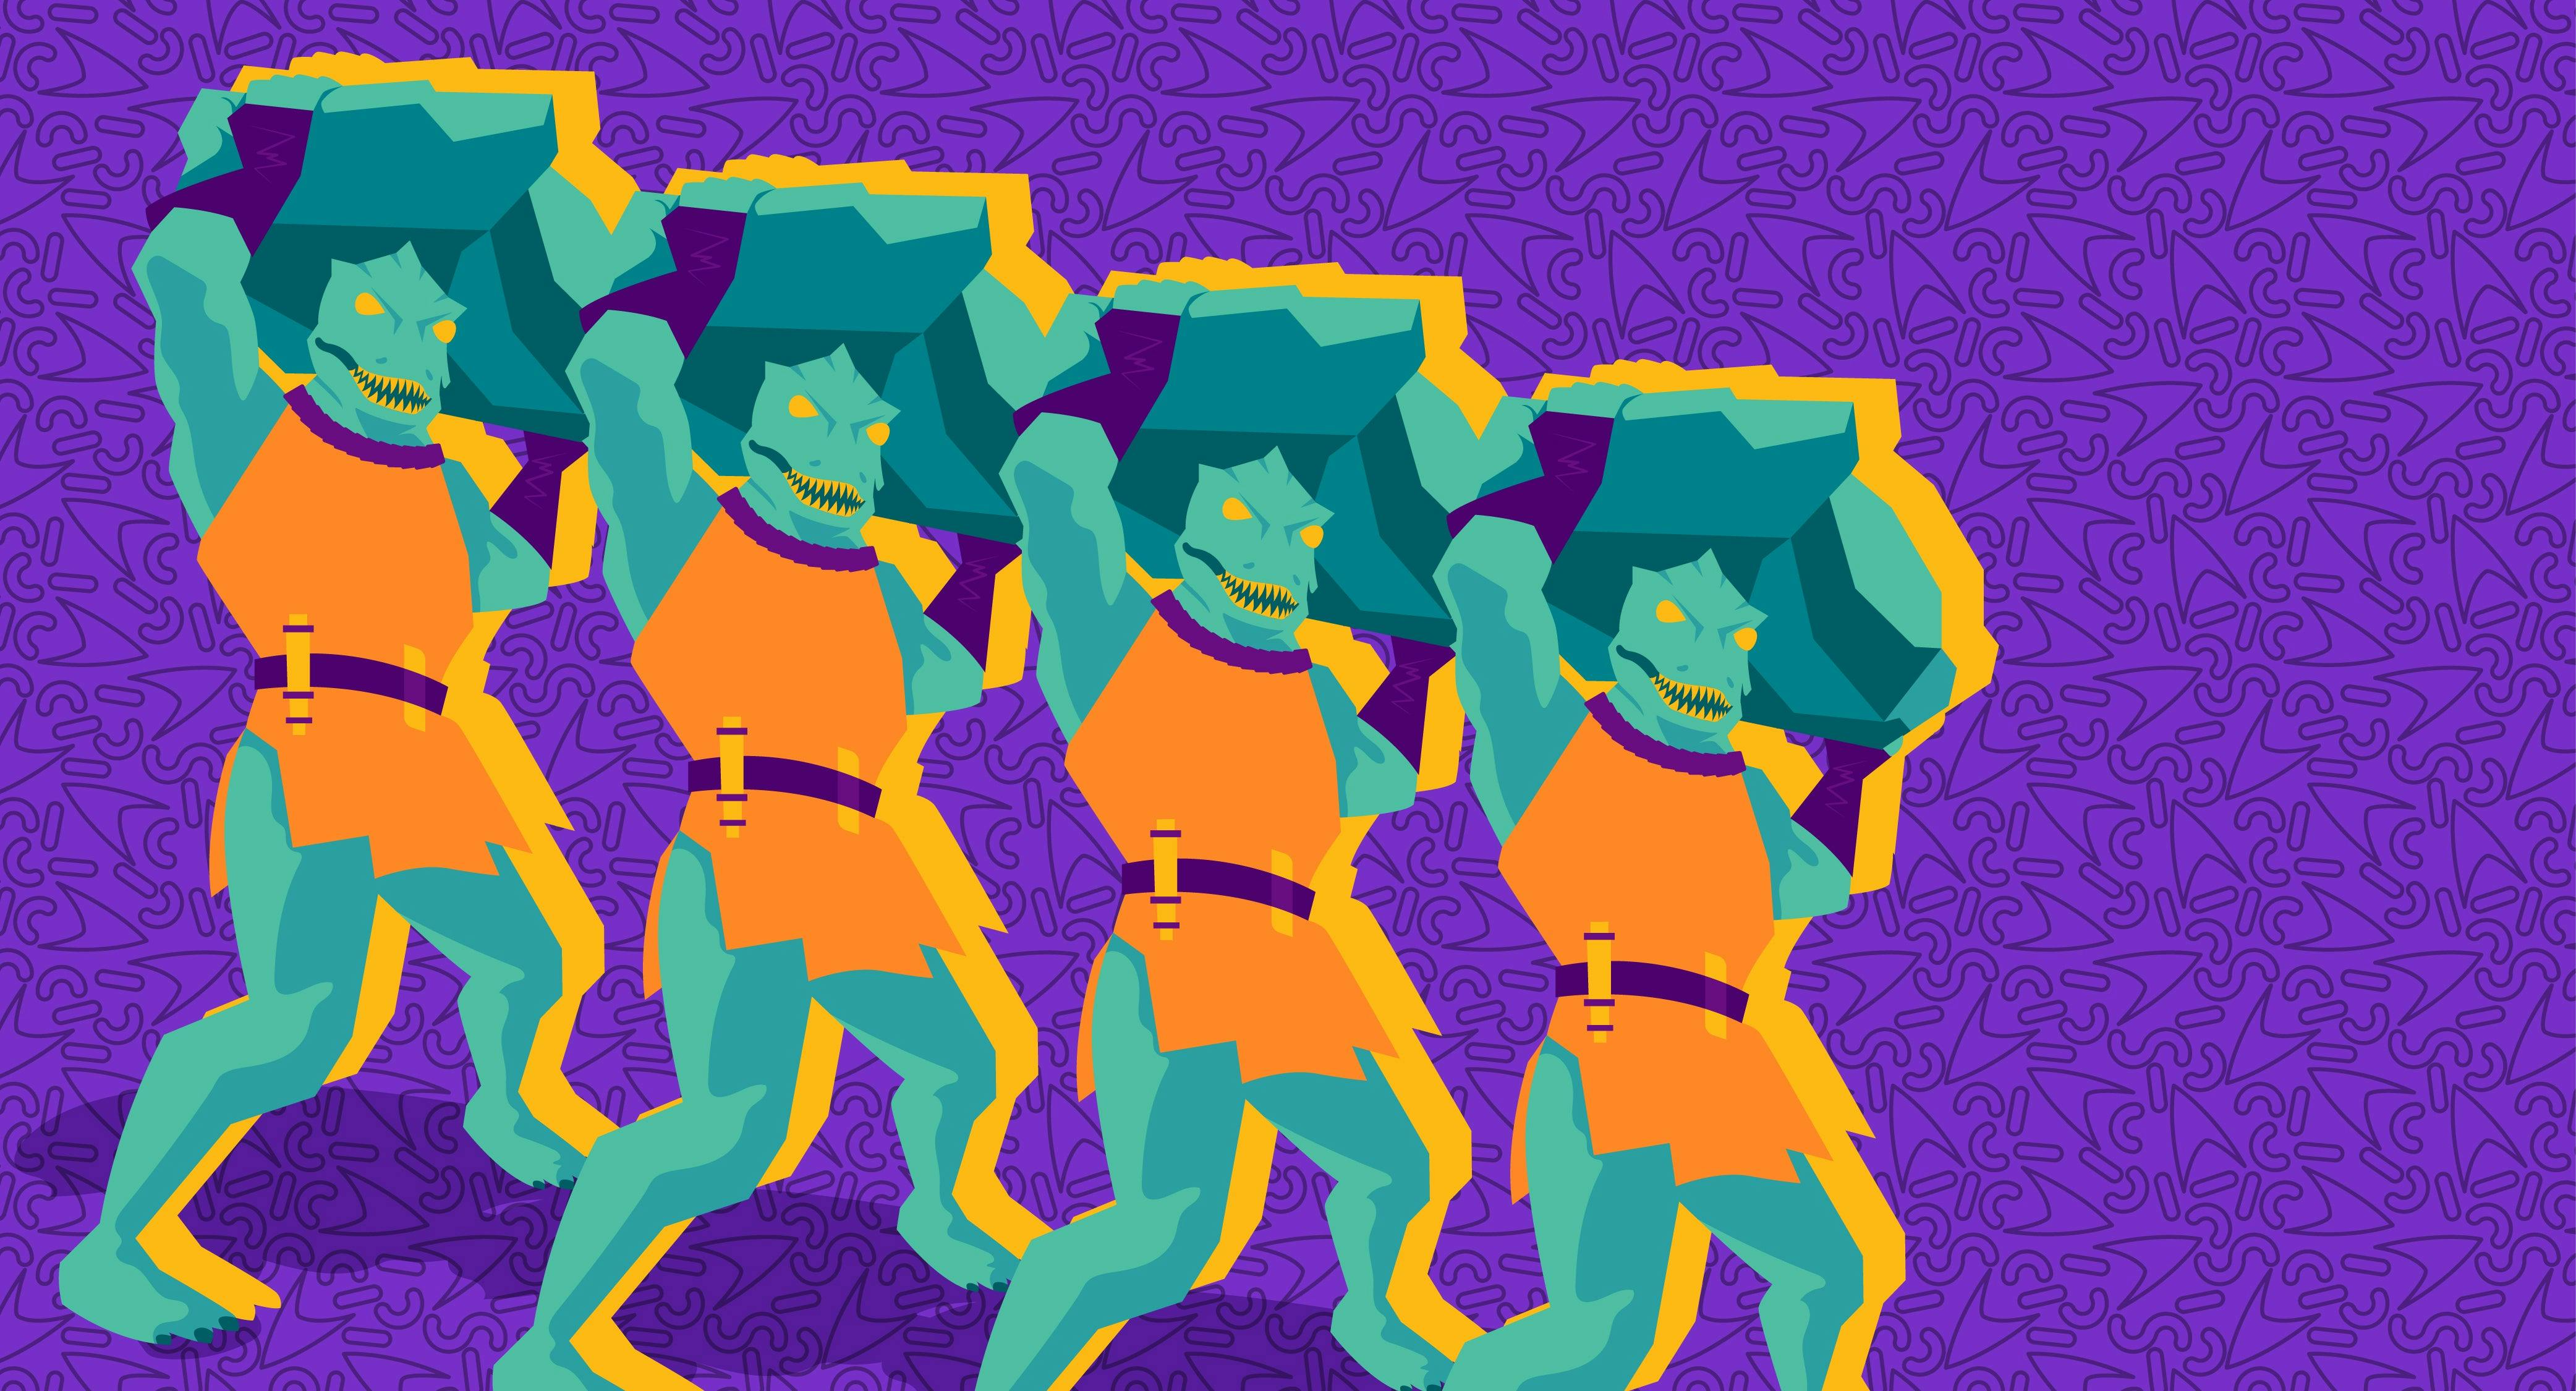 The Gorn captain from the episode "Arena" lifts up a rock to throw at Captain Kirk; the image is copied four times and set against a purple background.